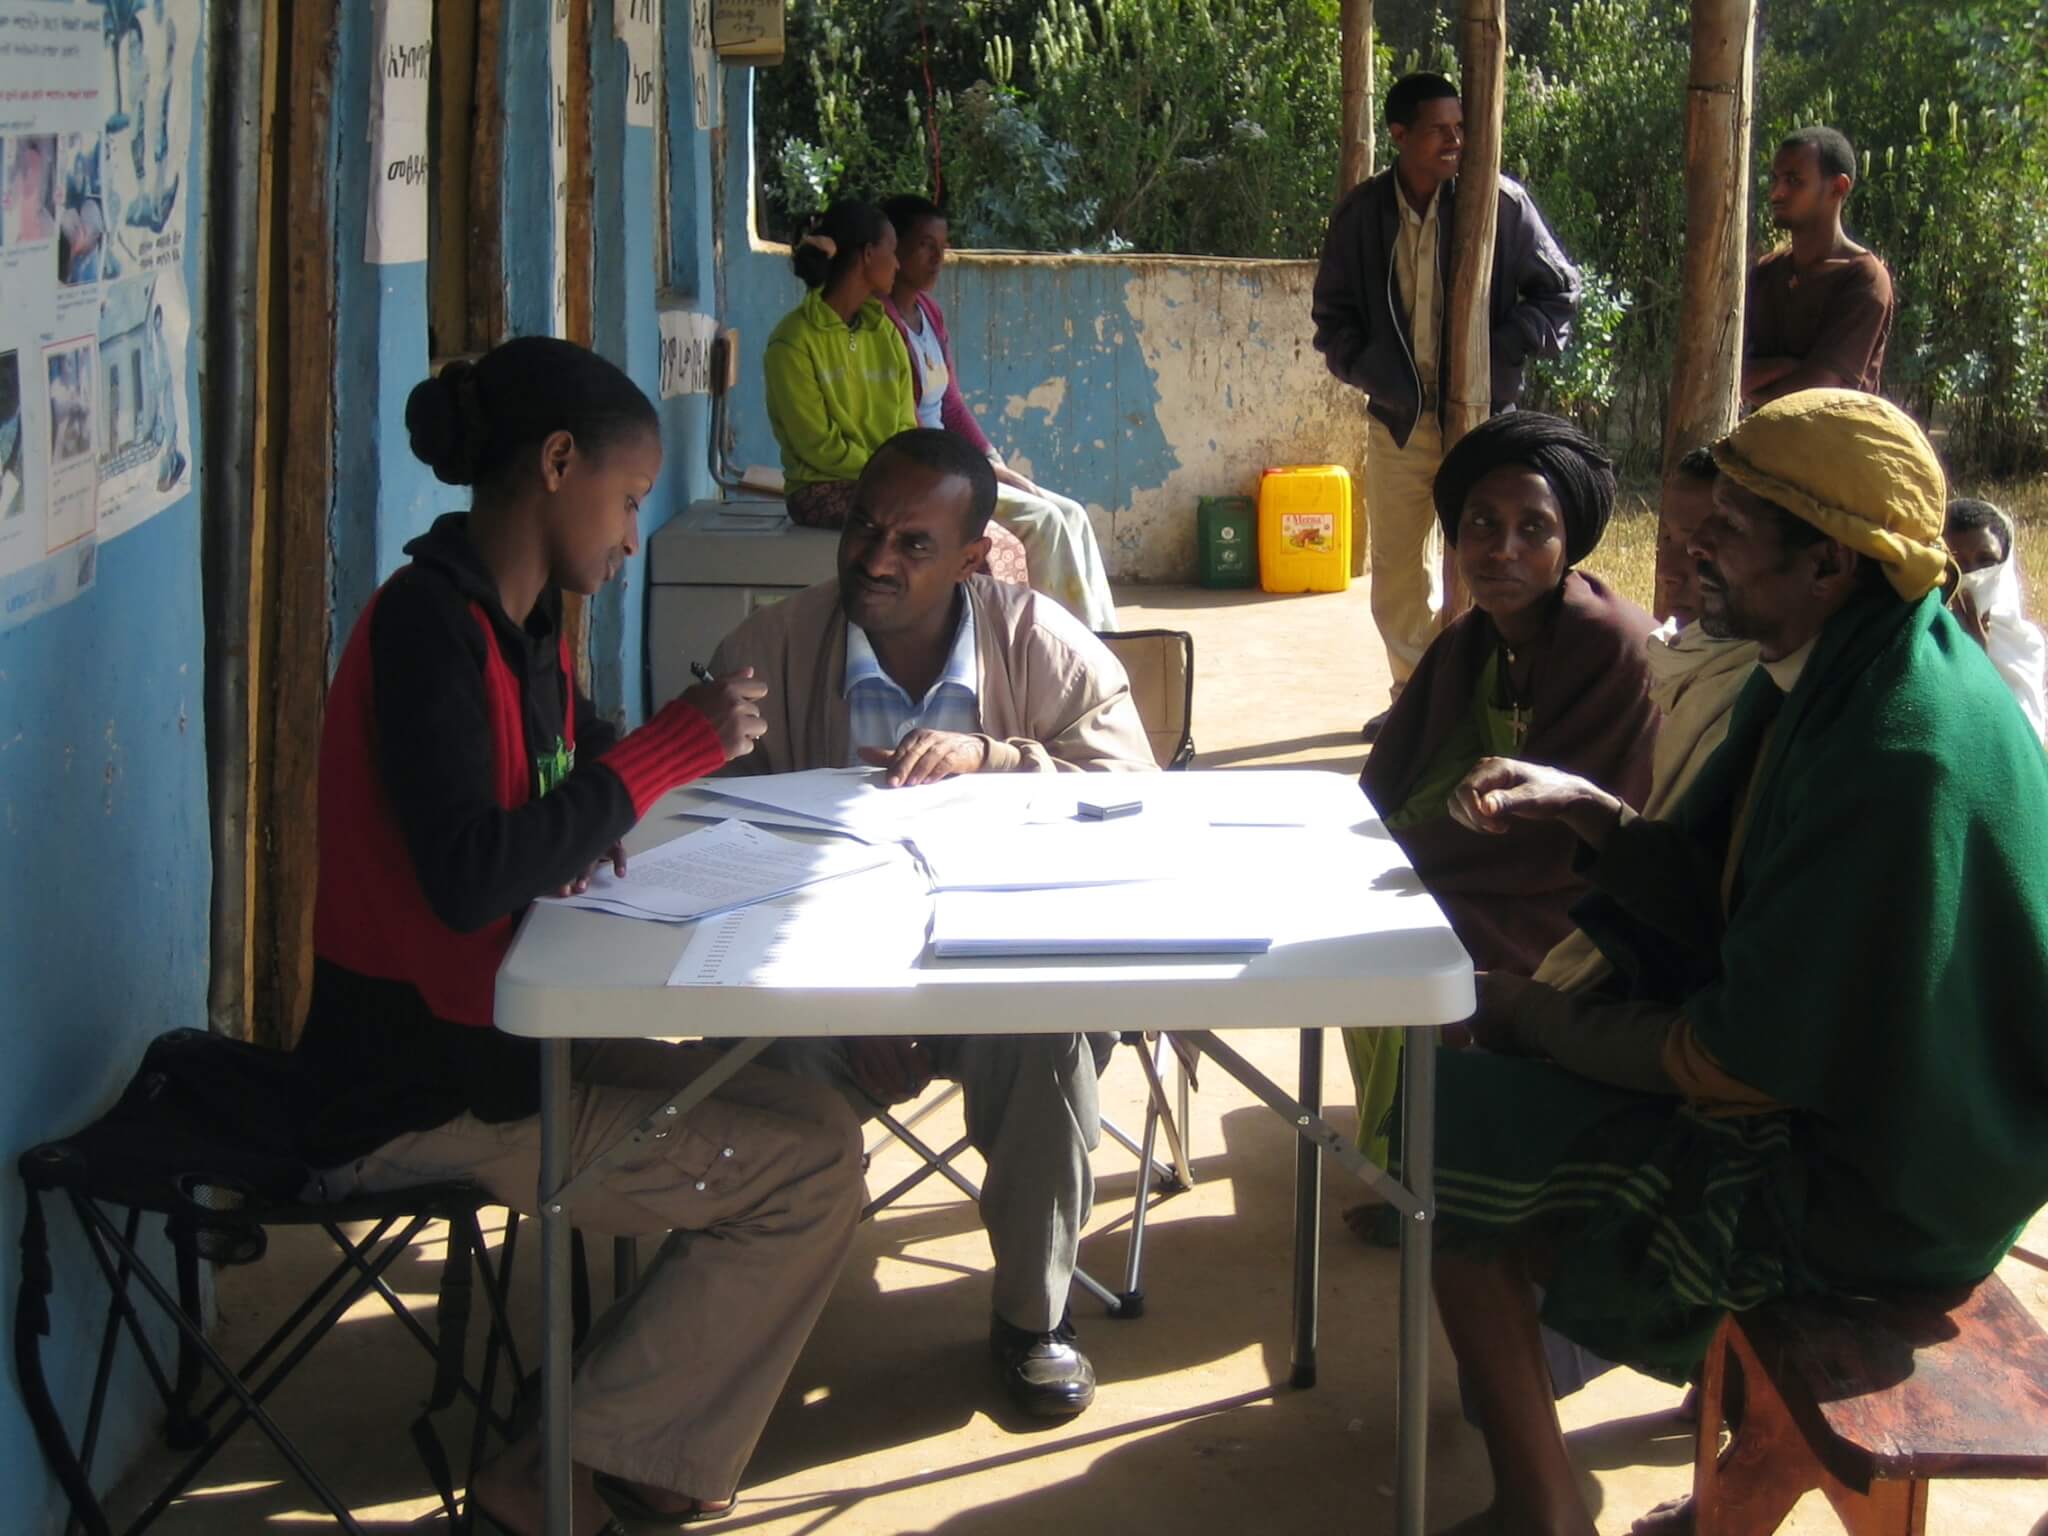 Members of Tishkoff's research team collecting ethnograpgic information from participants in Ethiopia